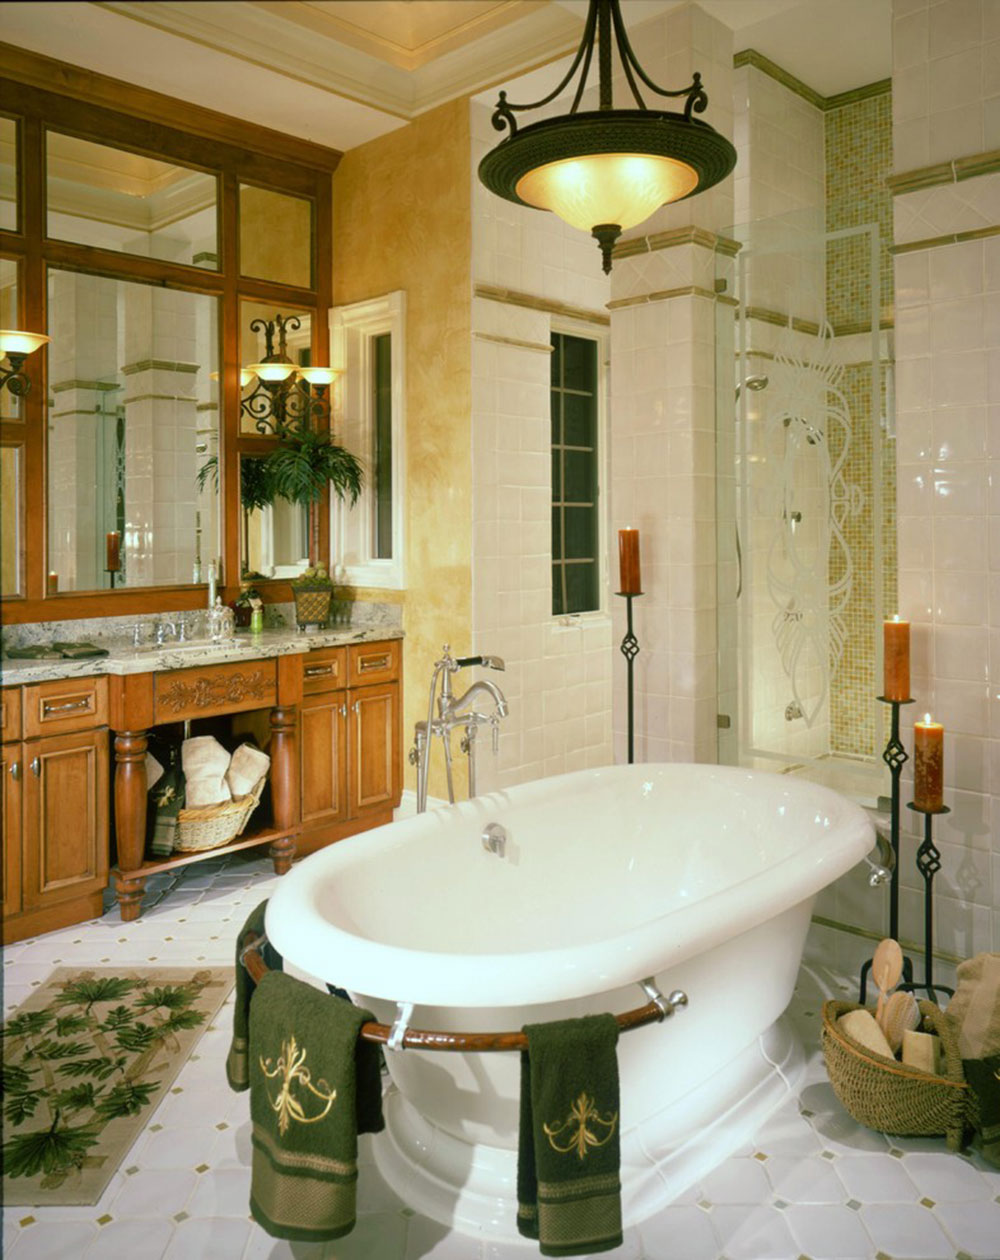 master-bath-by-Carleen-Young-Interior-Design Bathroom décor ideas you should try in your home